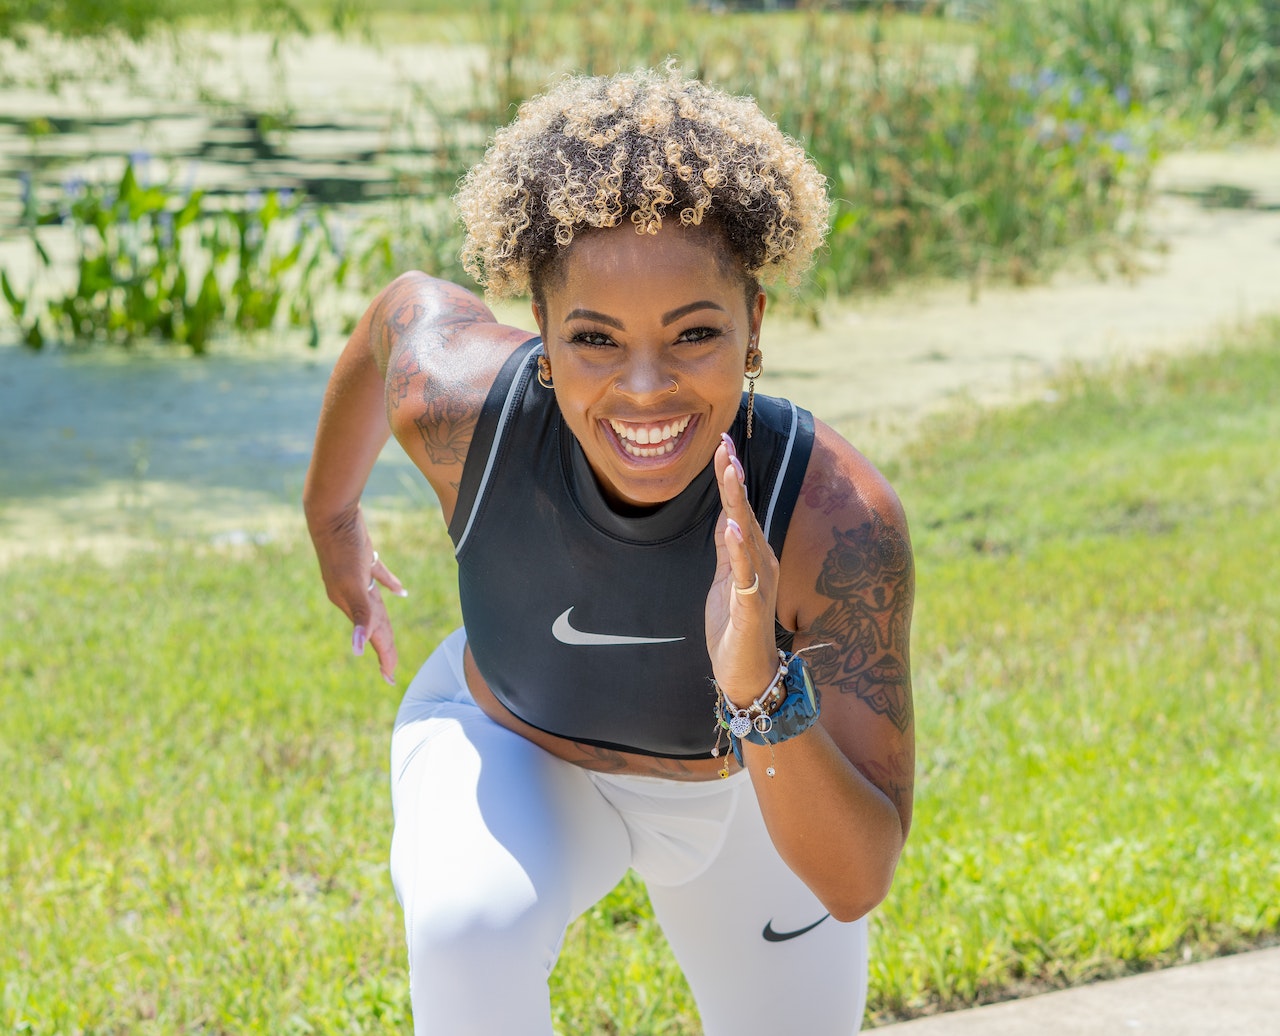 Woman smiling while running outdoors